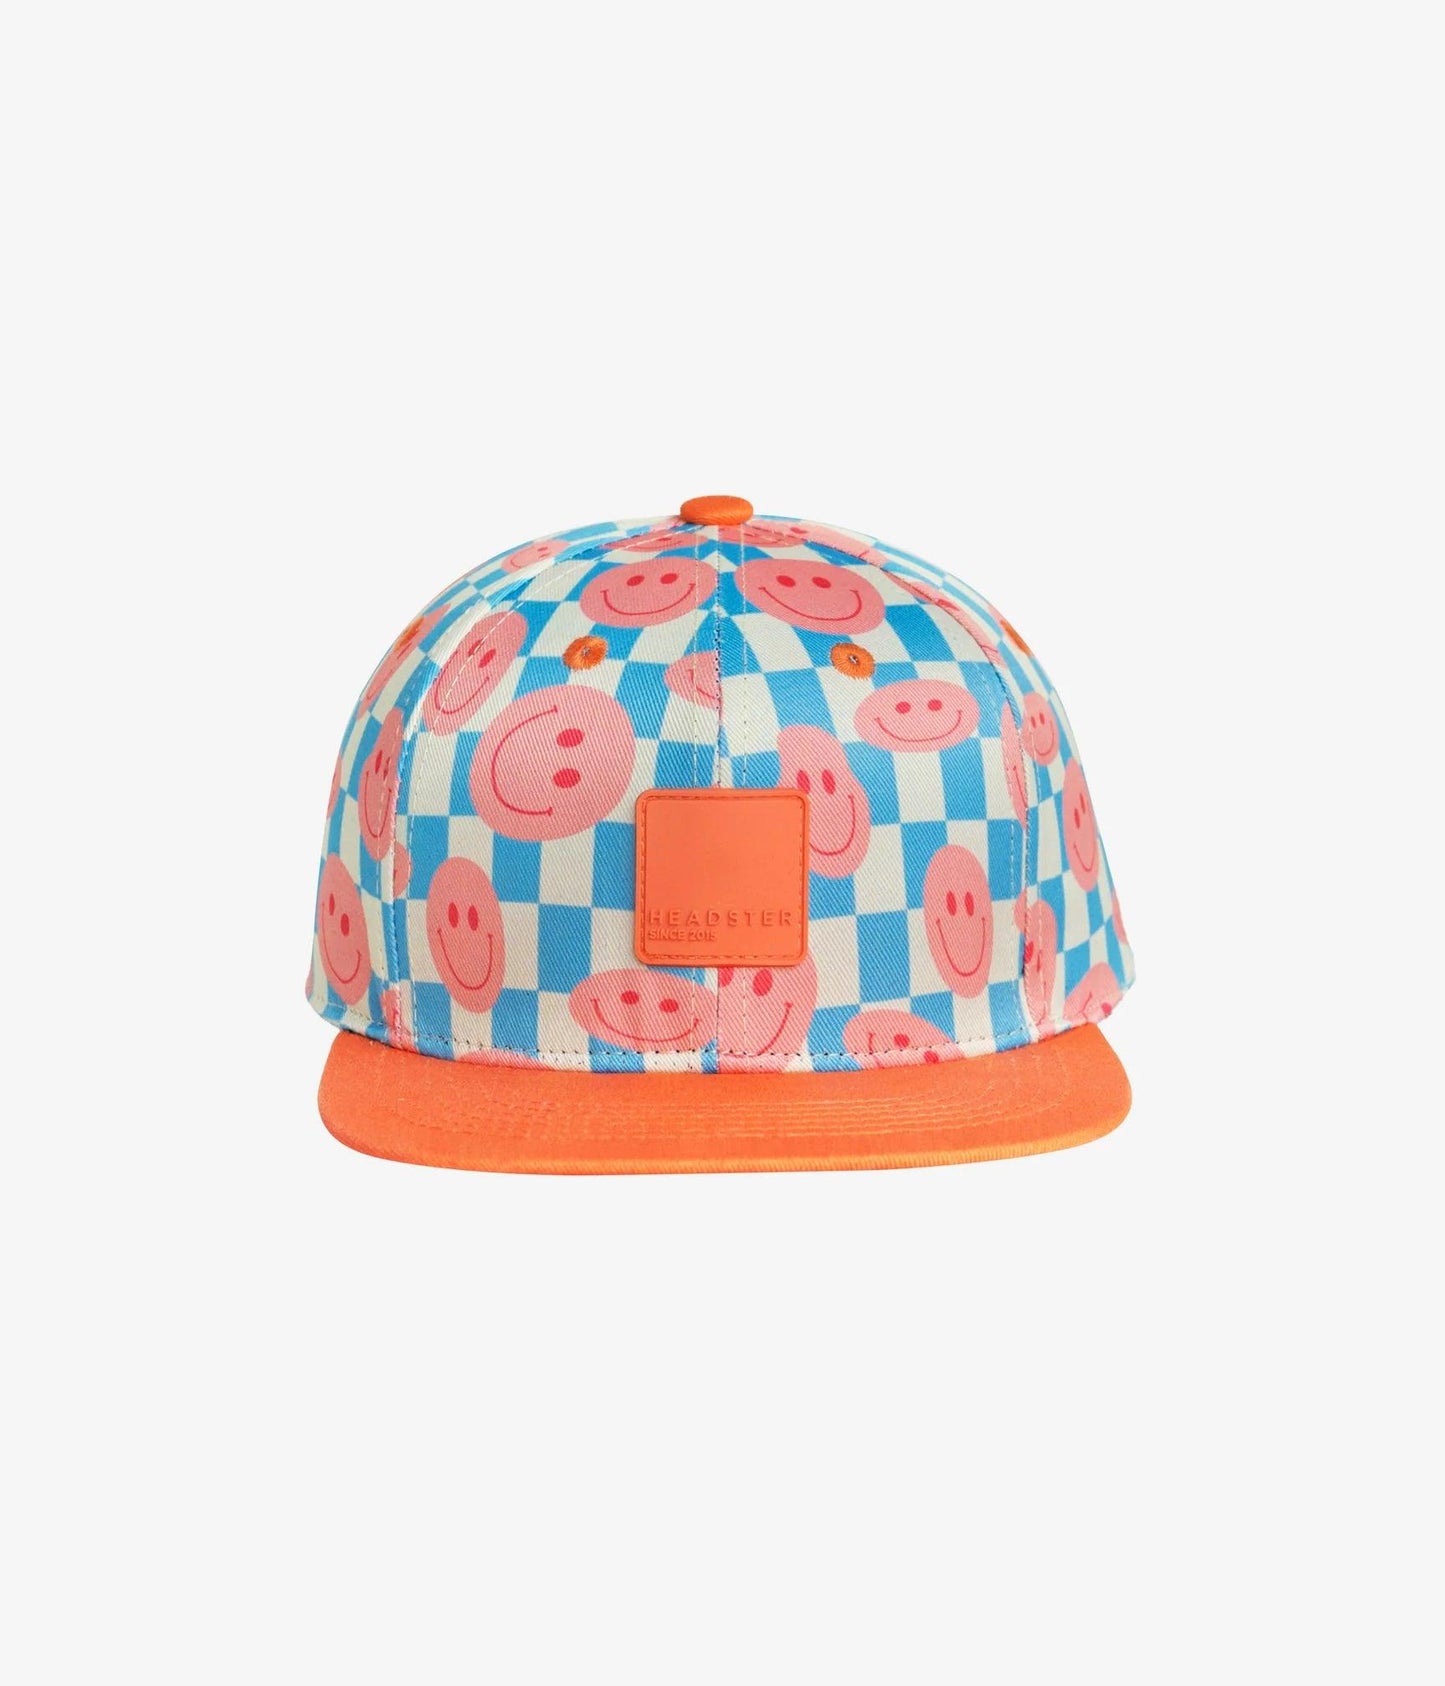 HEADSTER SMILEY SNAPBACK - Cottage Toys - Peterborough - Ontario - Canada